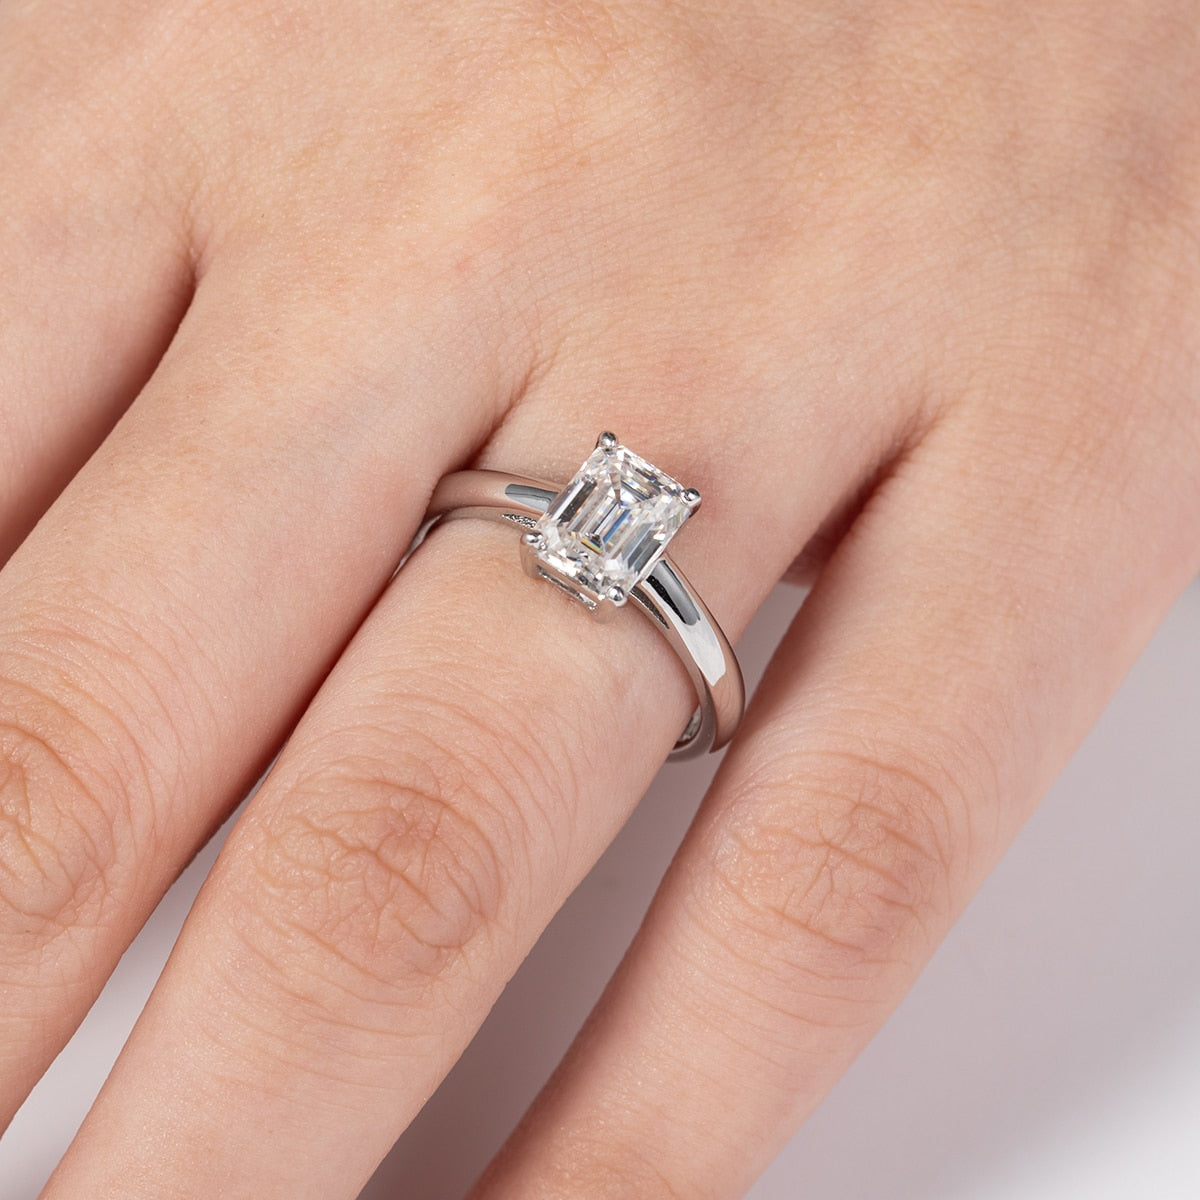 A Hand wearing a 2CT emerald cut moissanite sterling silver ring.